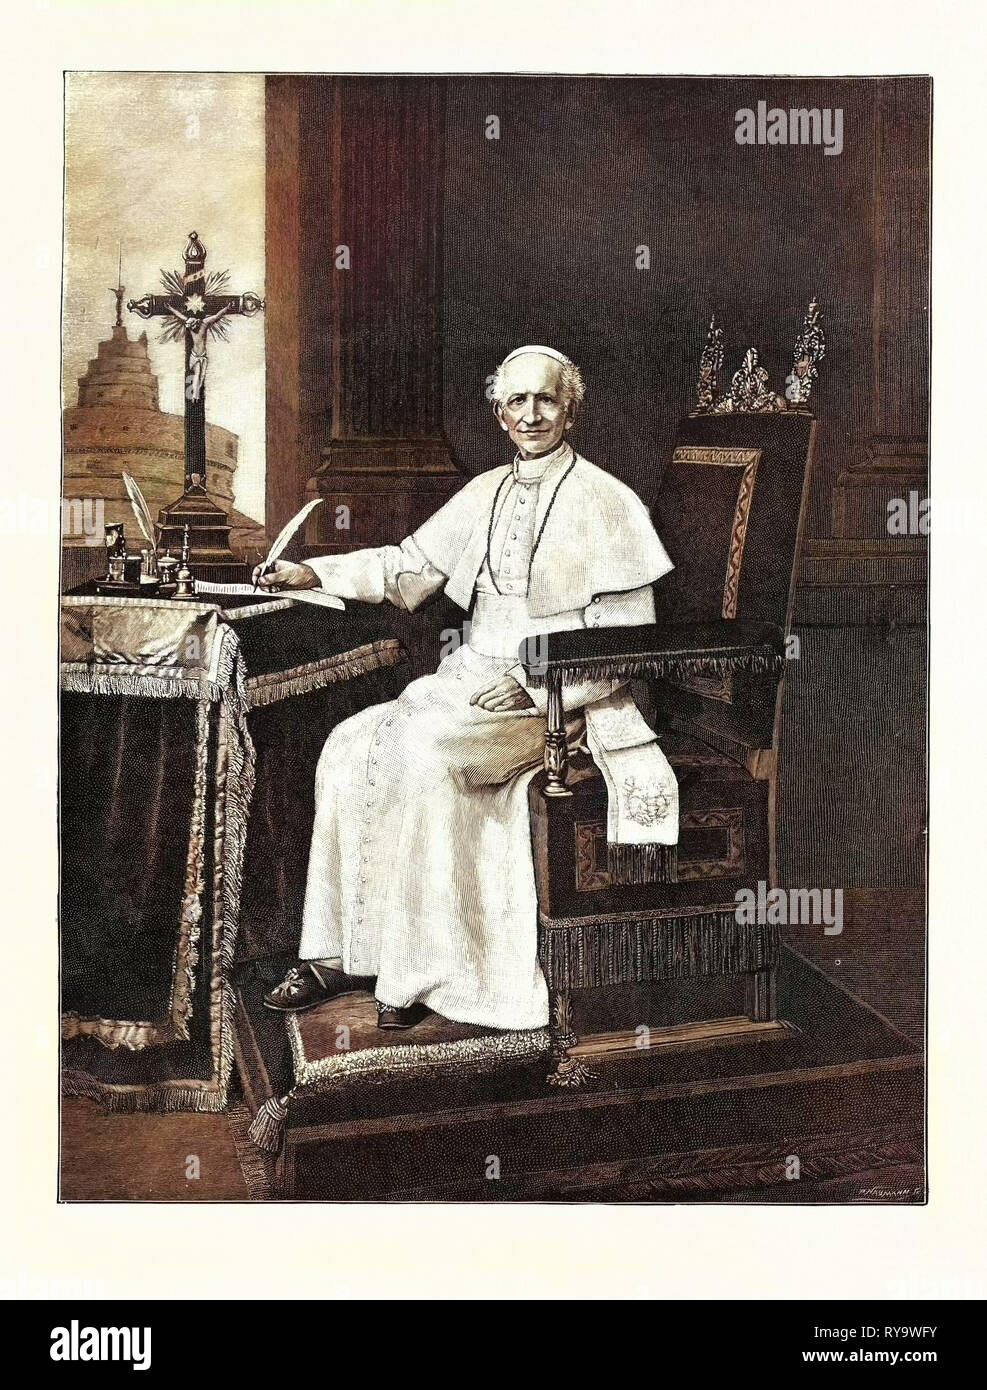 His Holiness Pope Leo Xiii, 1893 Engraving Stock Photo